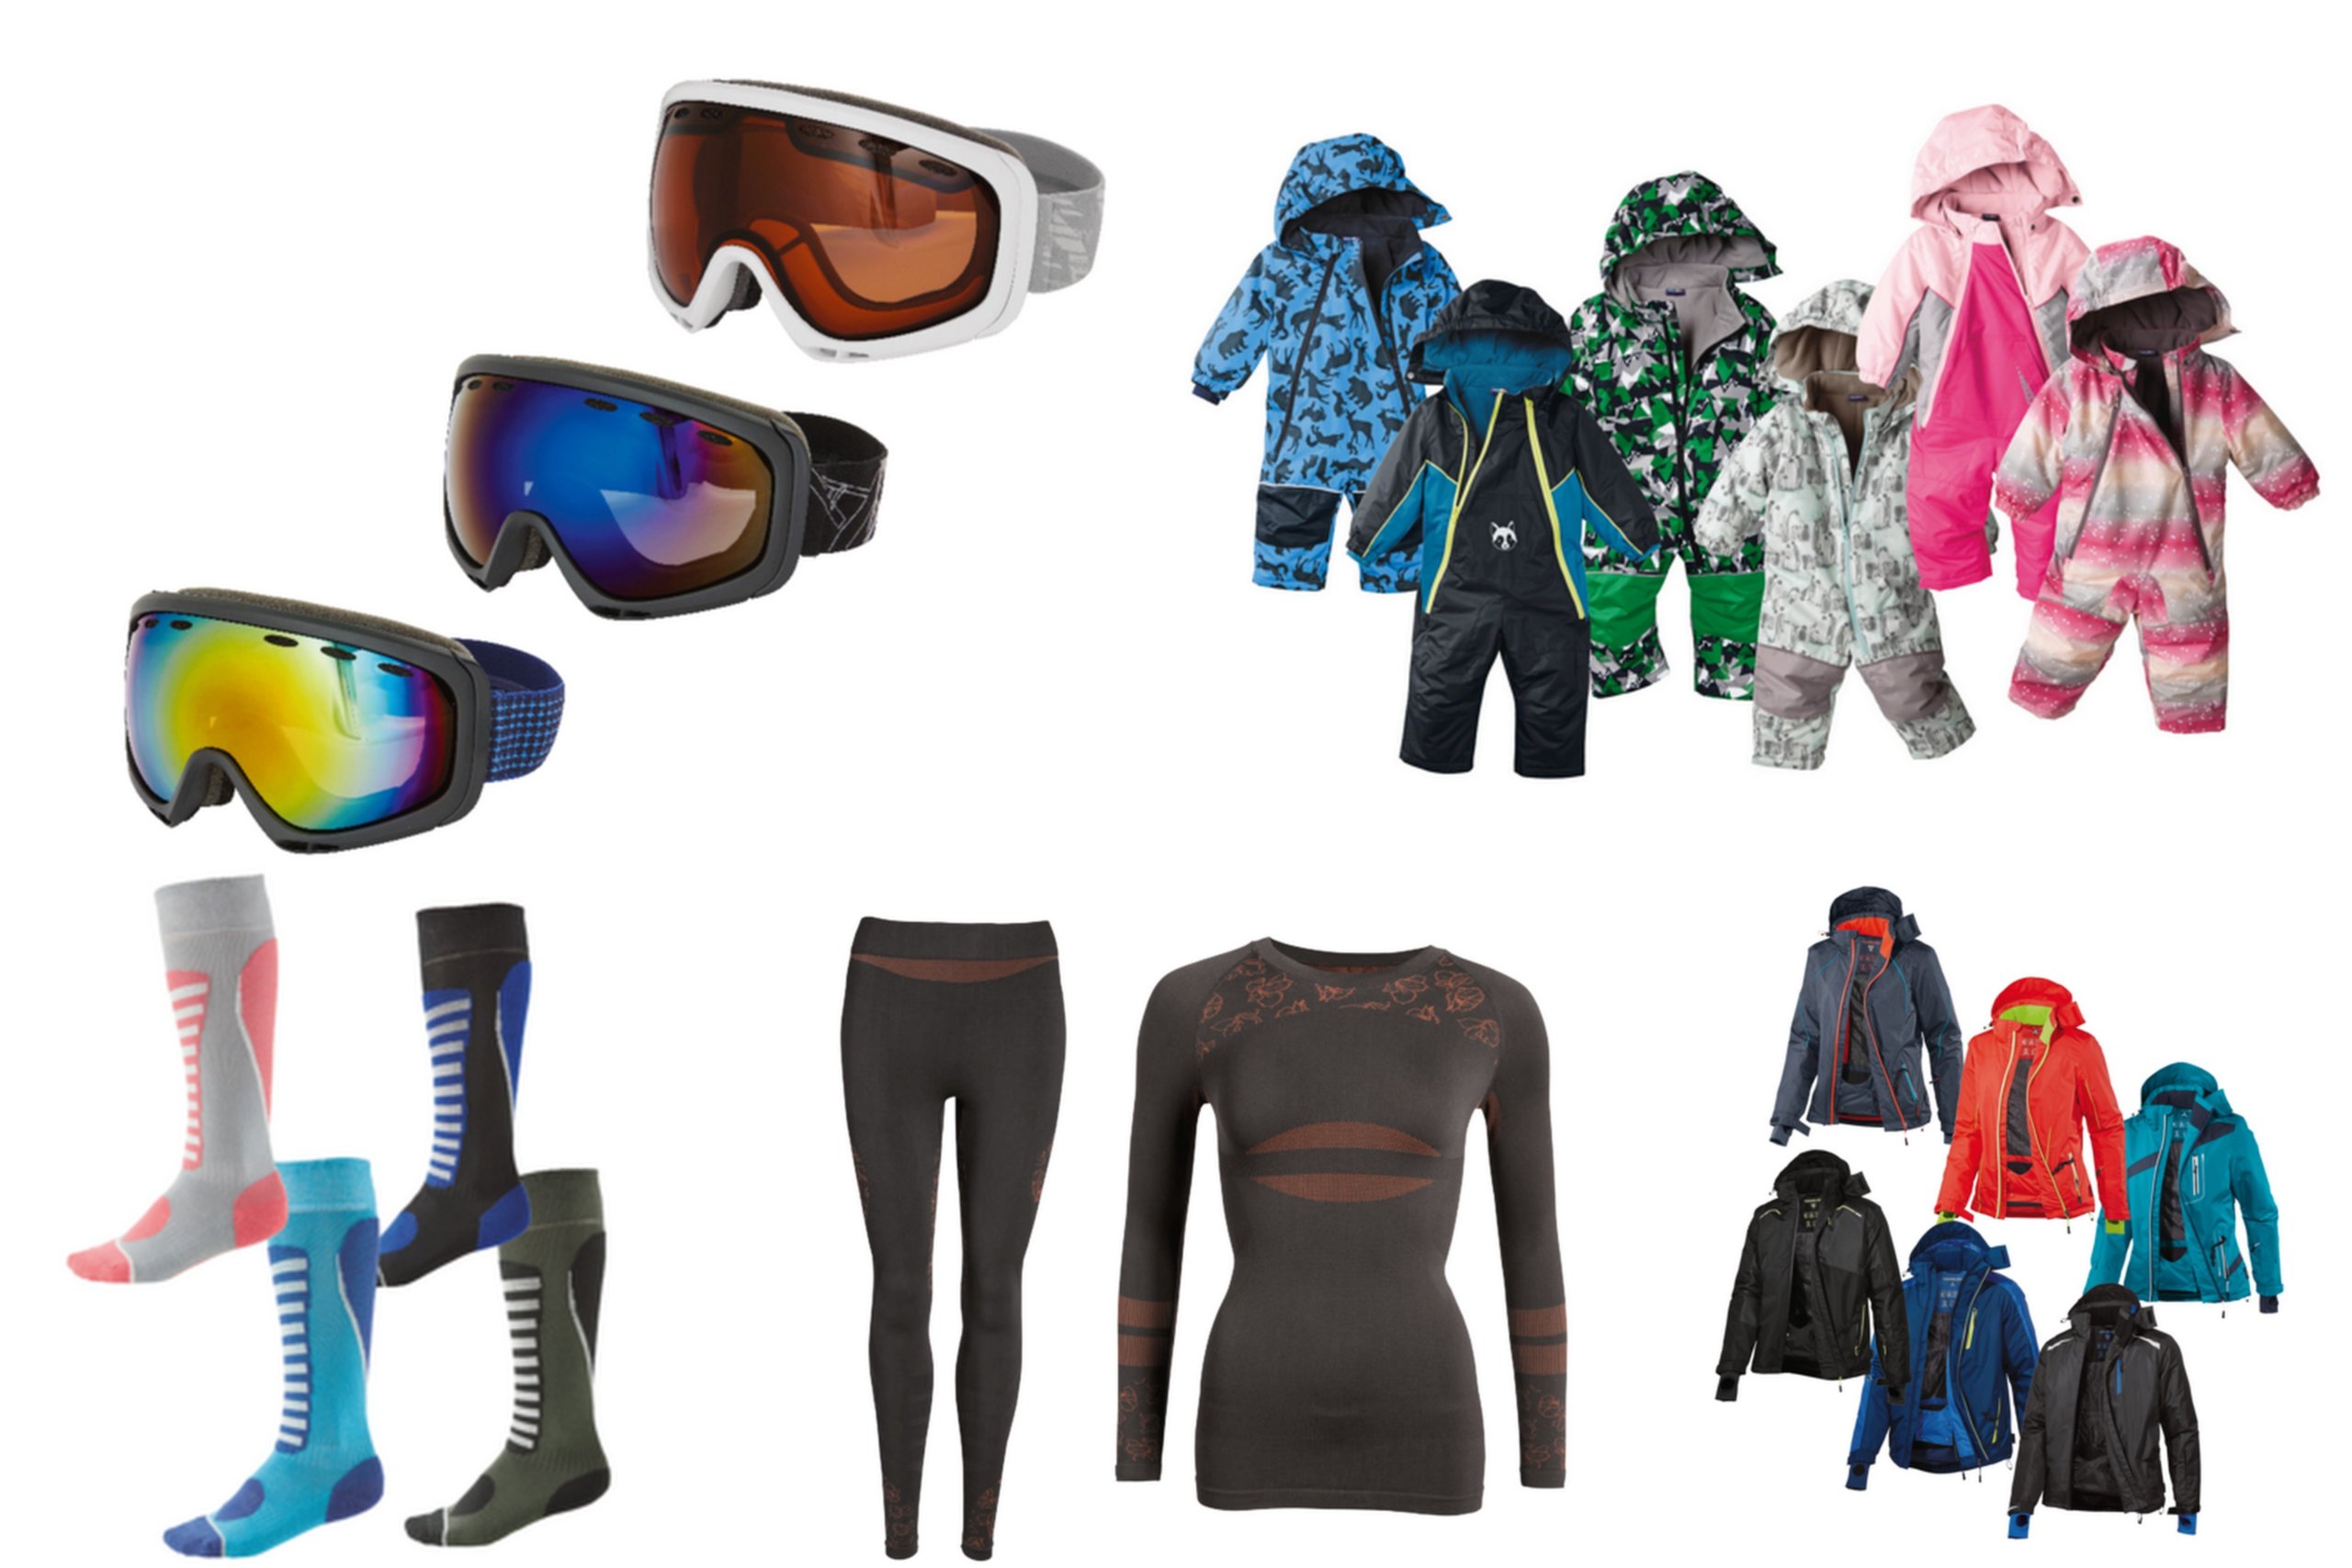 Lidl Ski Gear: The Complete Guide